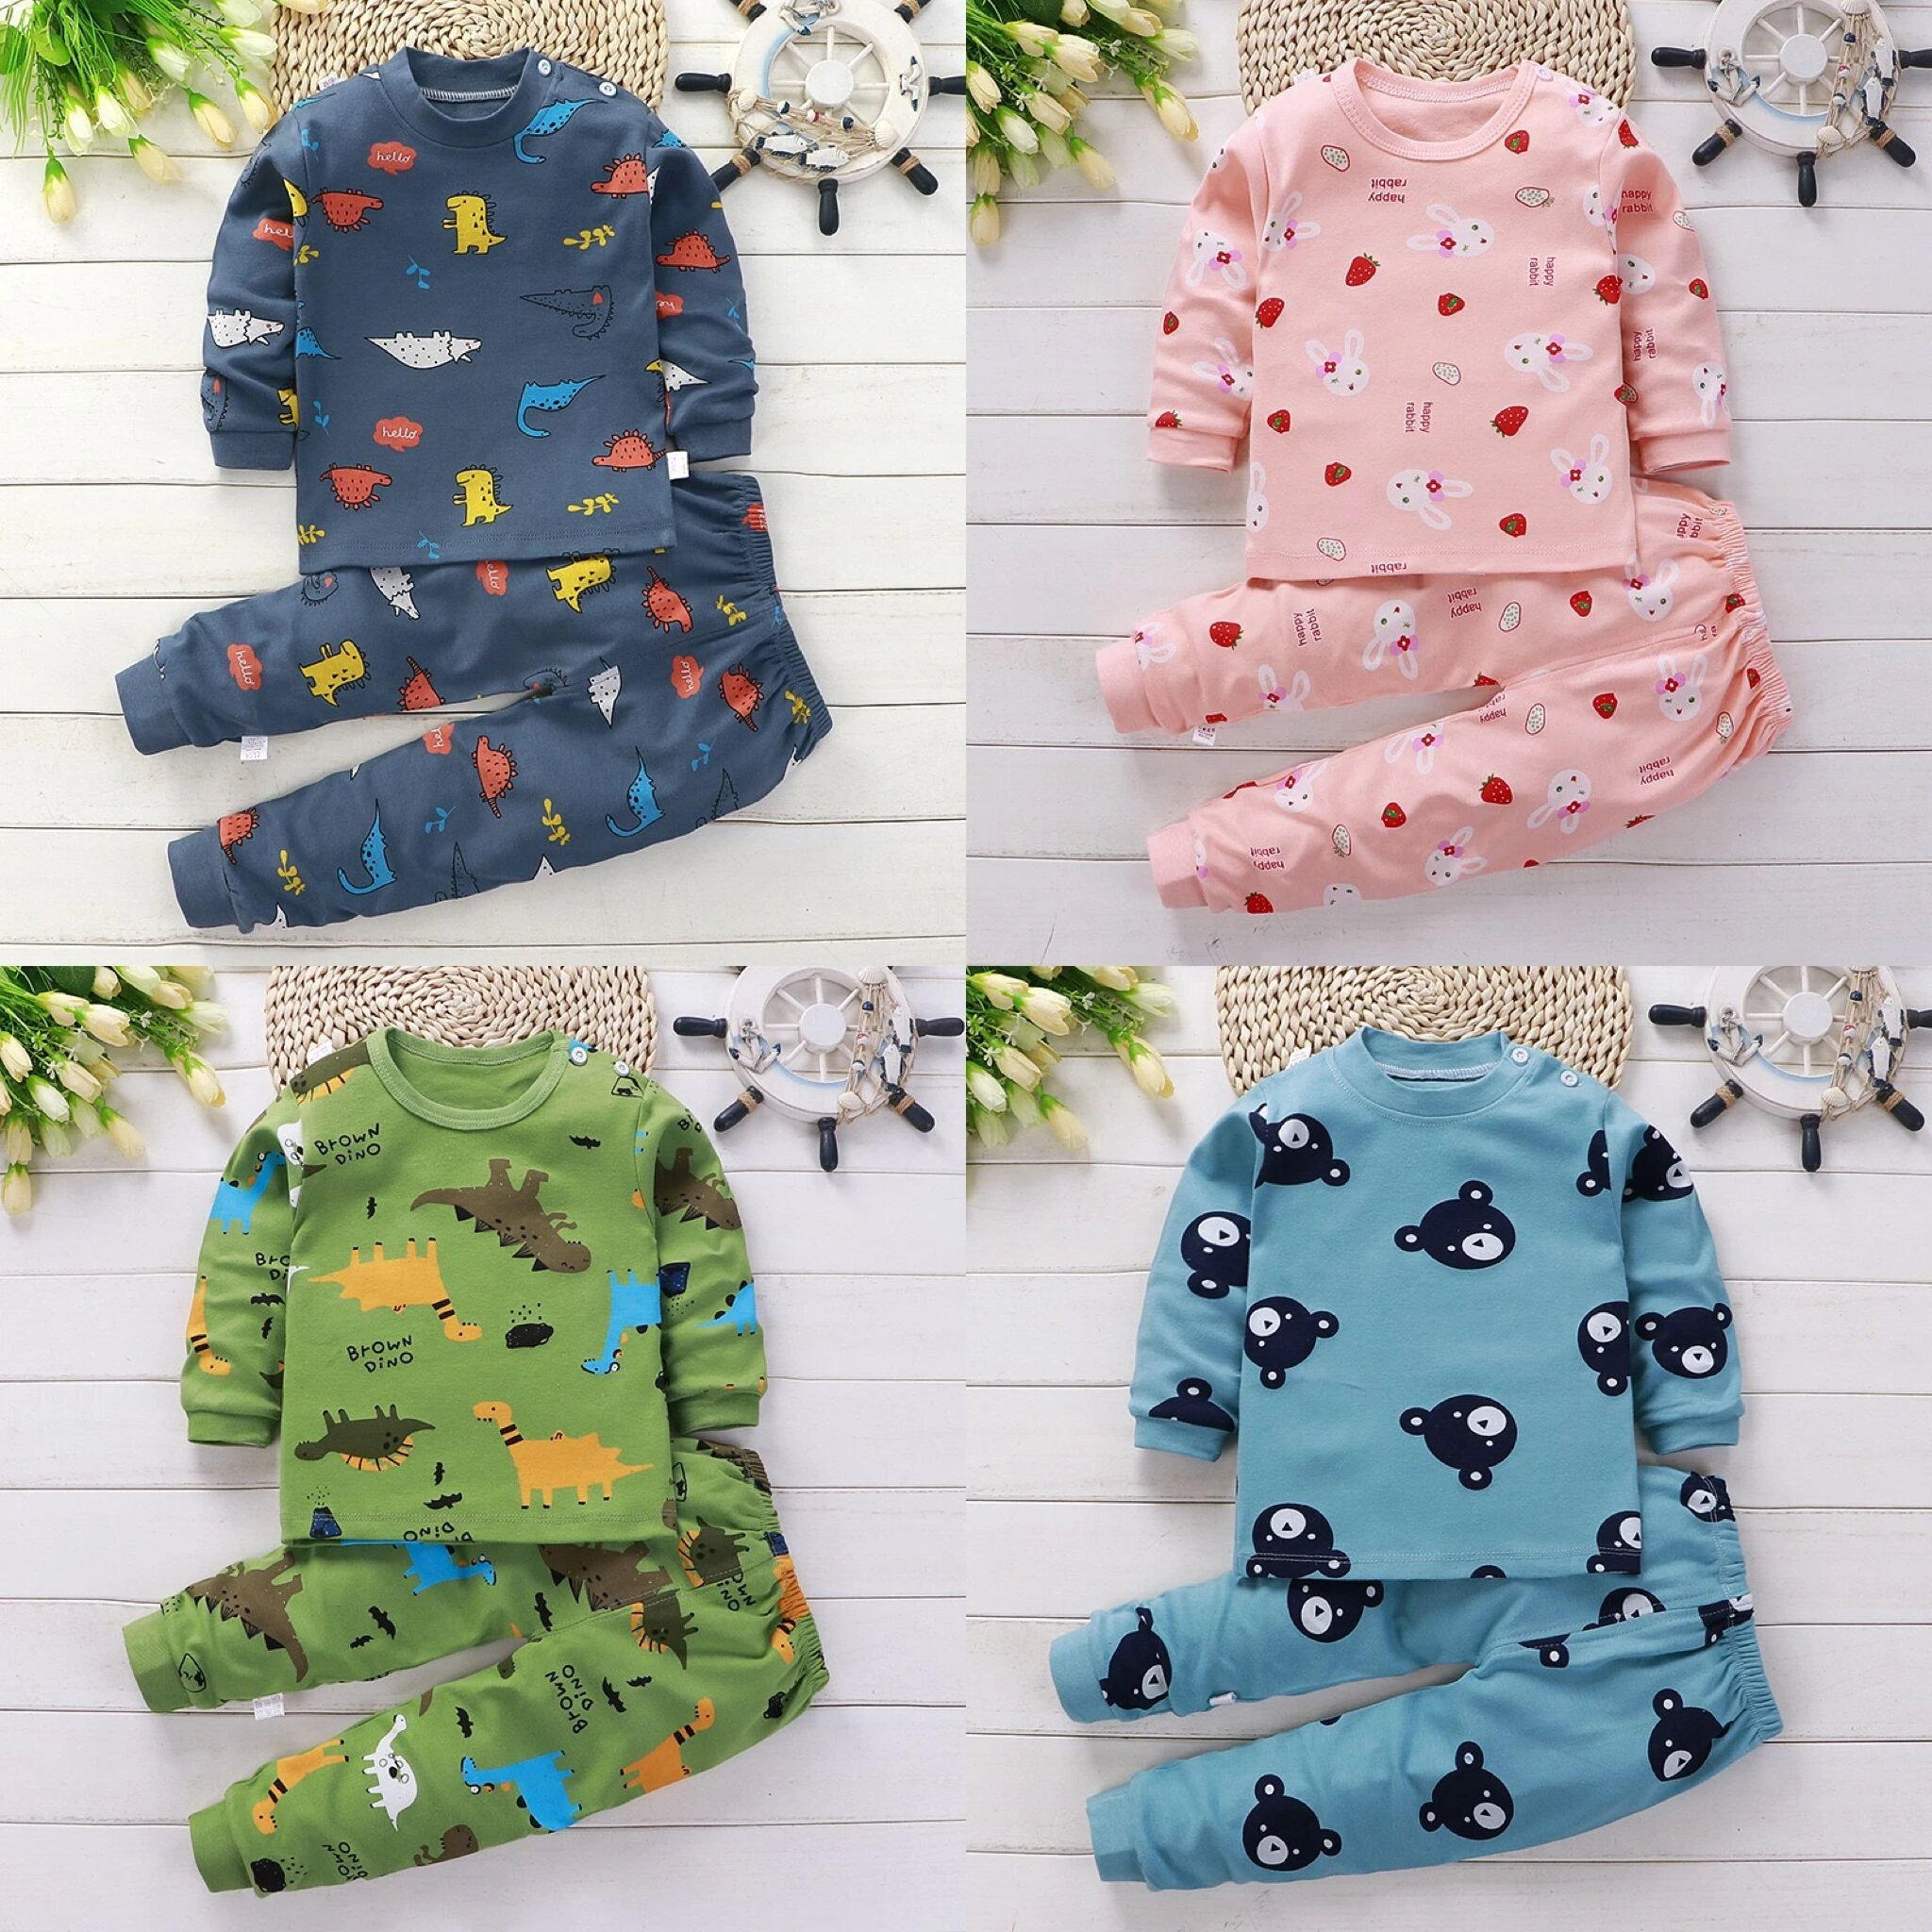 baby knitted clothing set Designer Brand Baby Boys Cotton Underwear Suit Baby Girls Autumn Clothes Suit Newborn Kids Long Sleeve Pajamas 2-piece Sets baby knitted clothing set